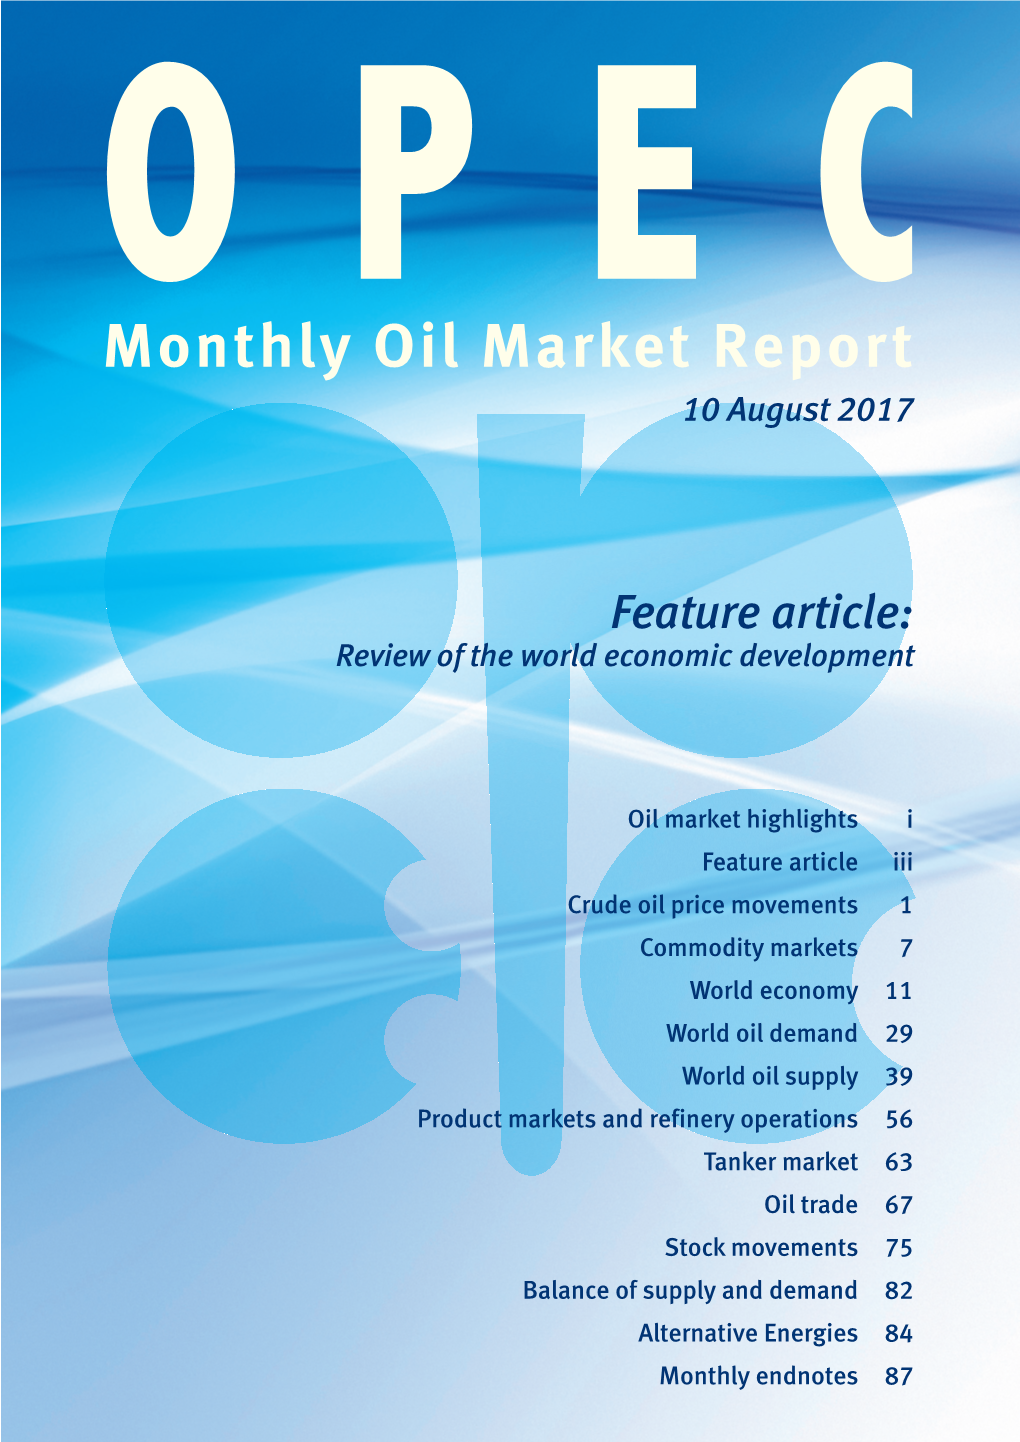 Monthly Oil Market Report 10 August 2017